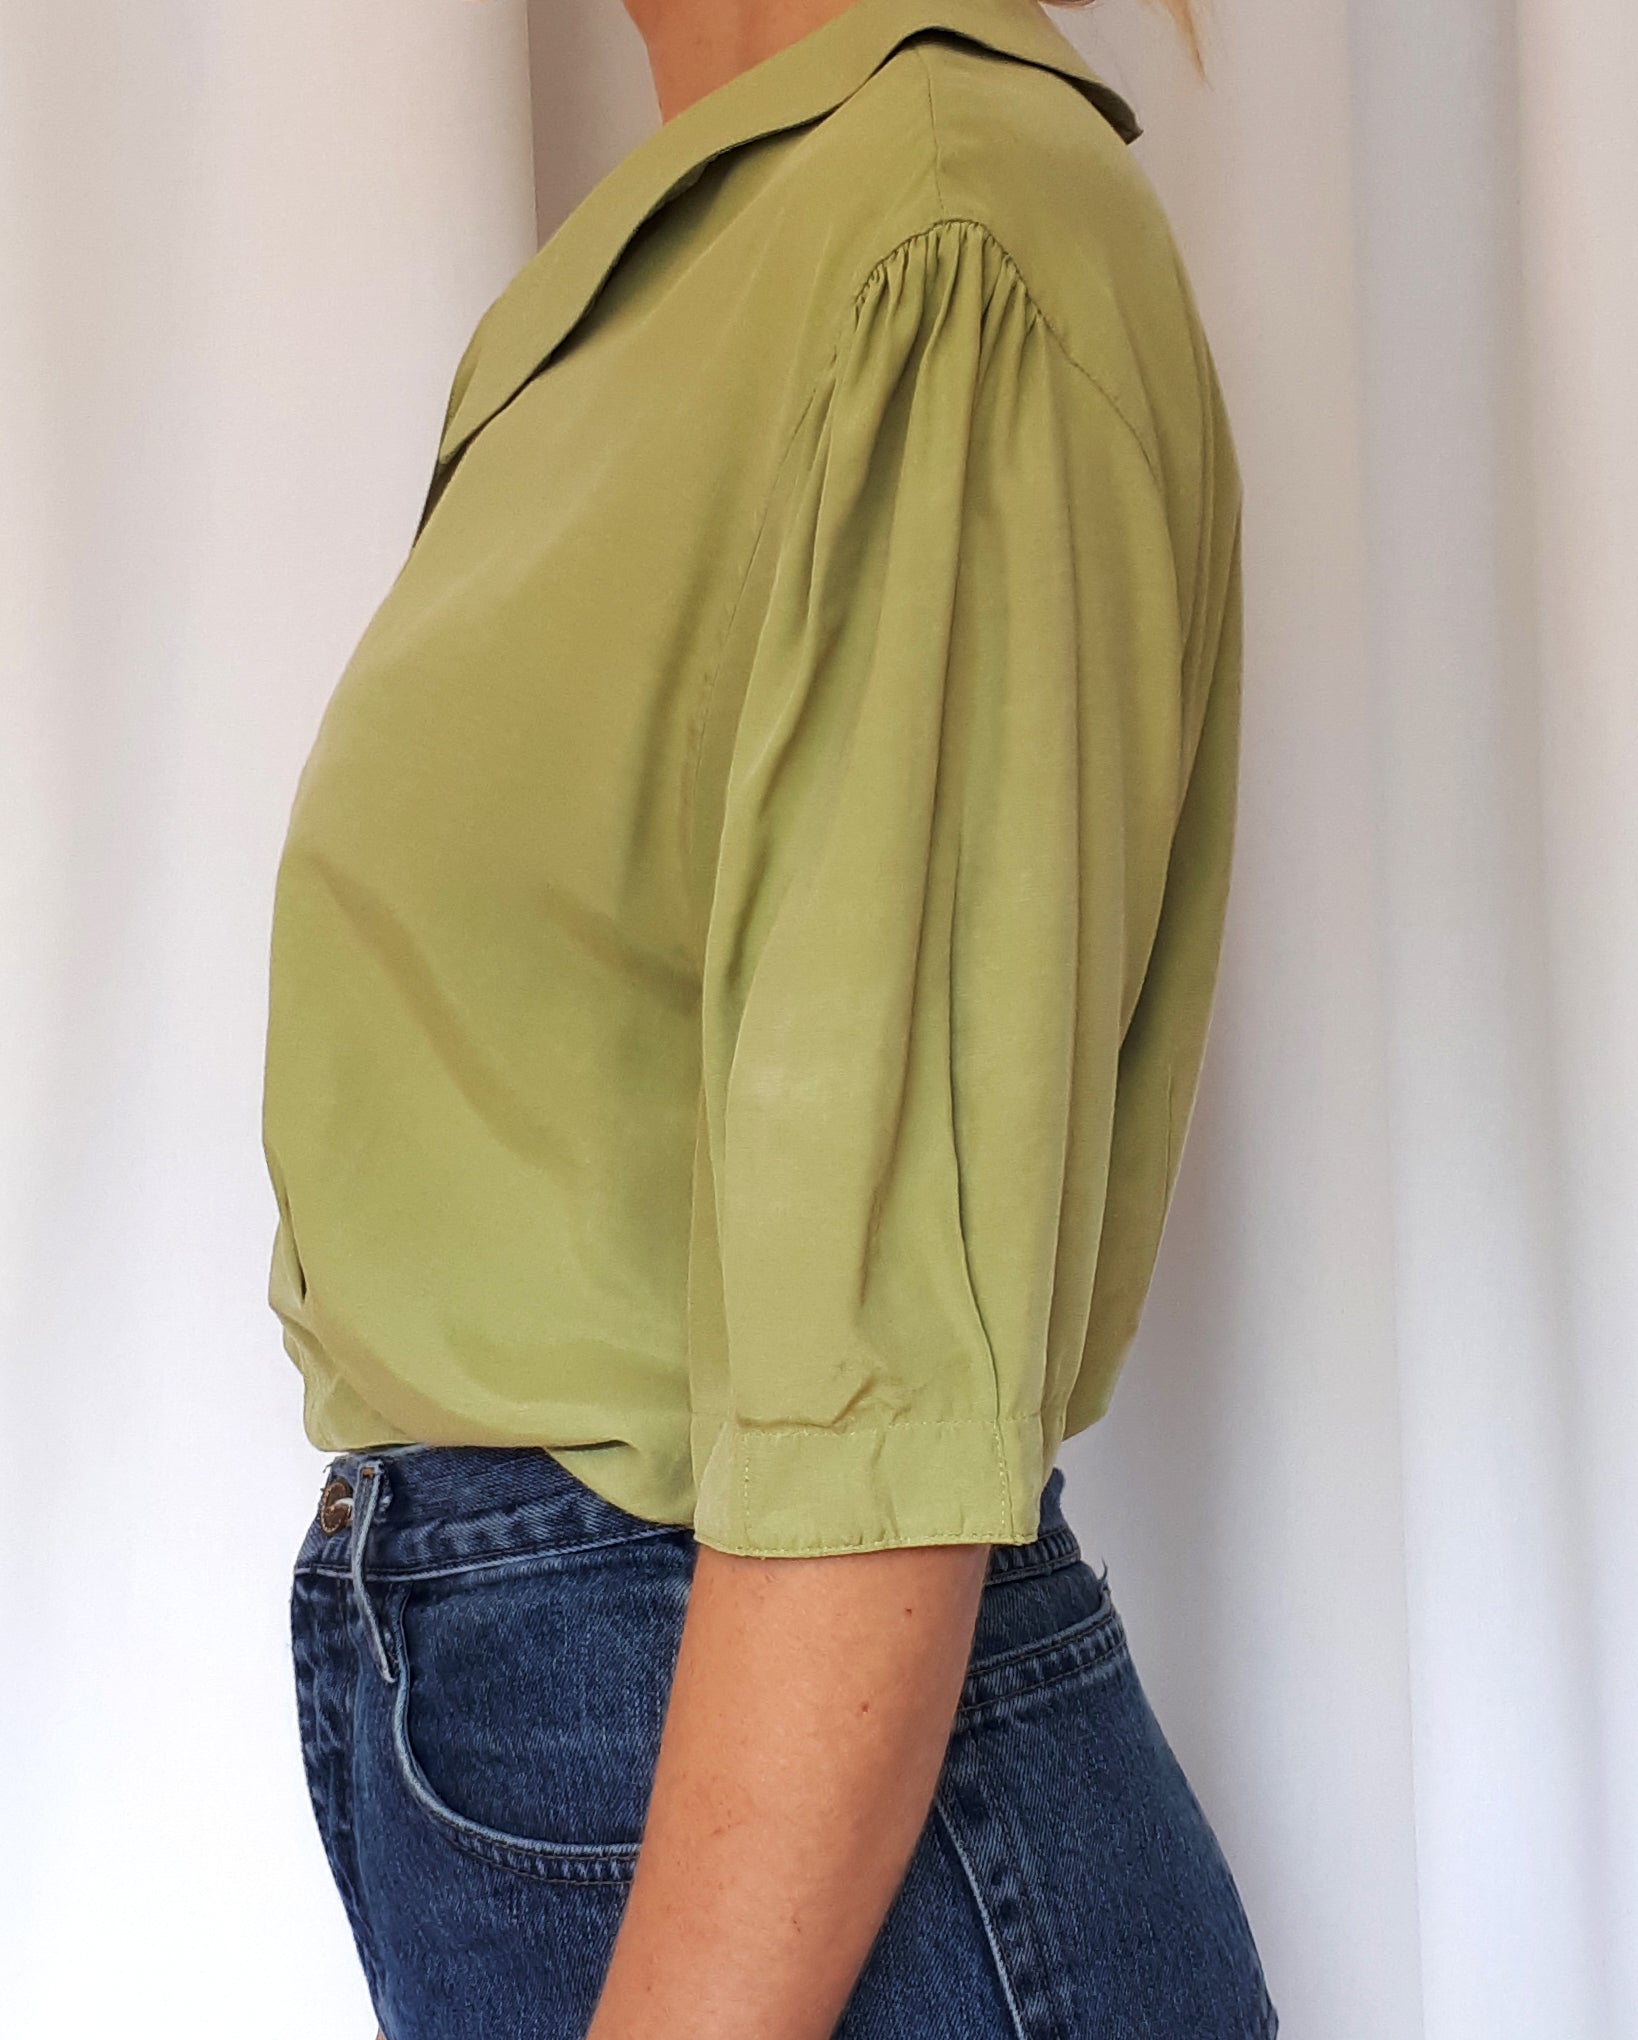 Vintage Moss Green Blouse With Peter Pan Collar and Puffy Sleeves